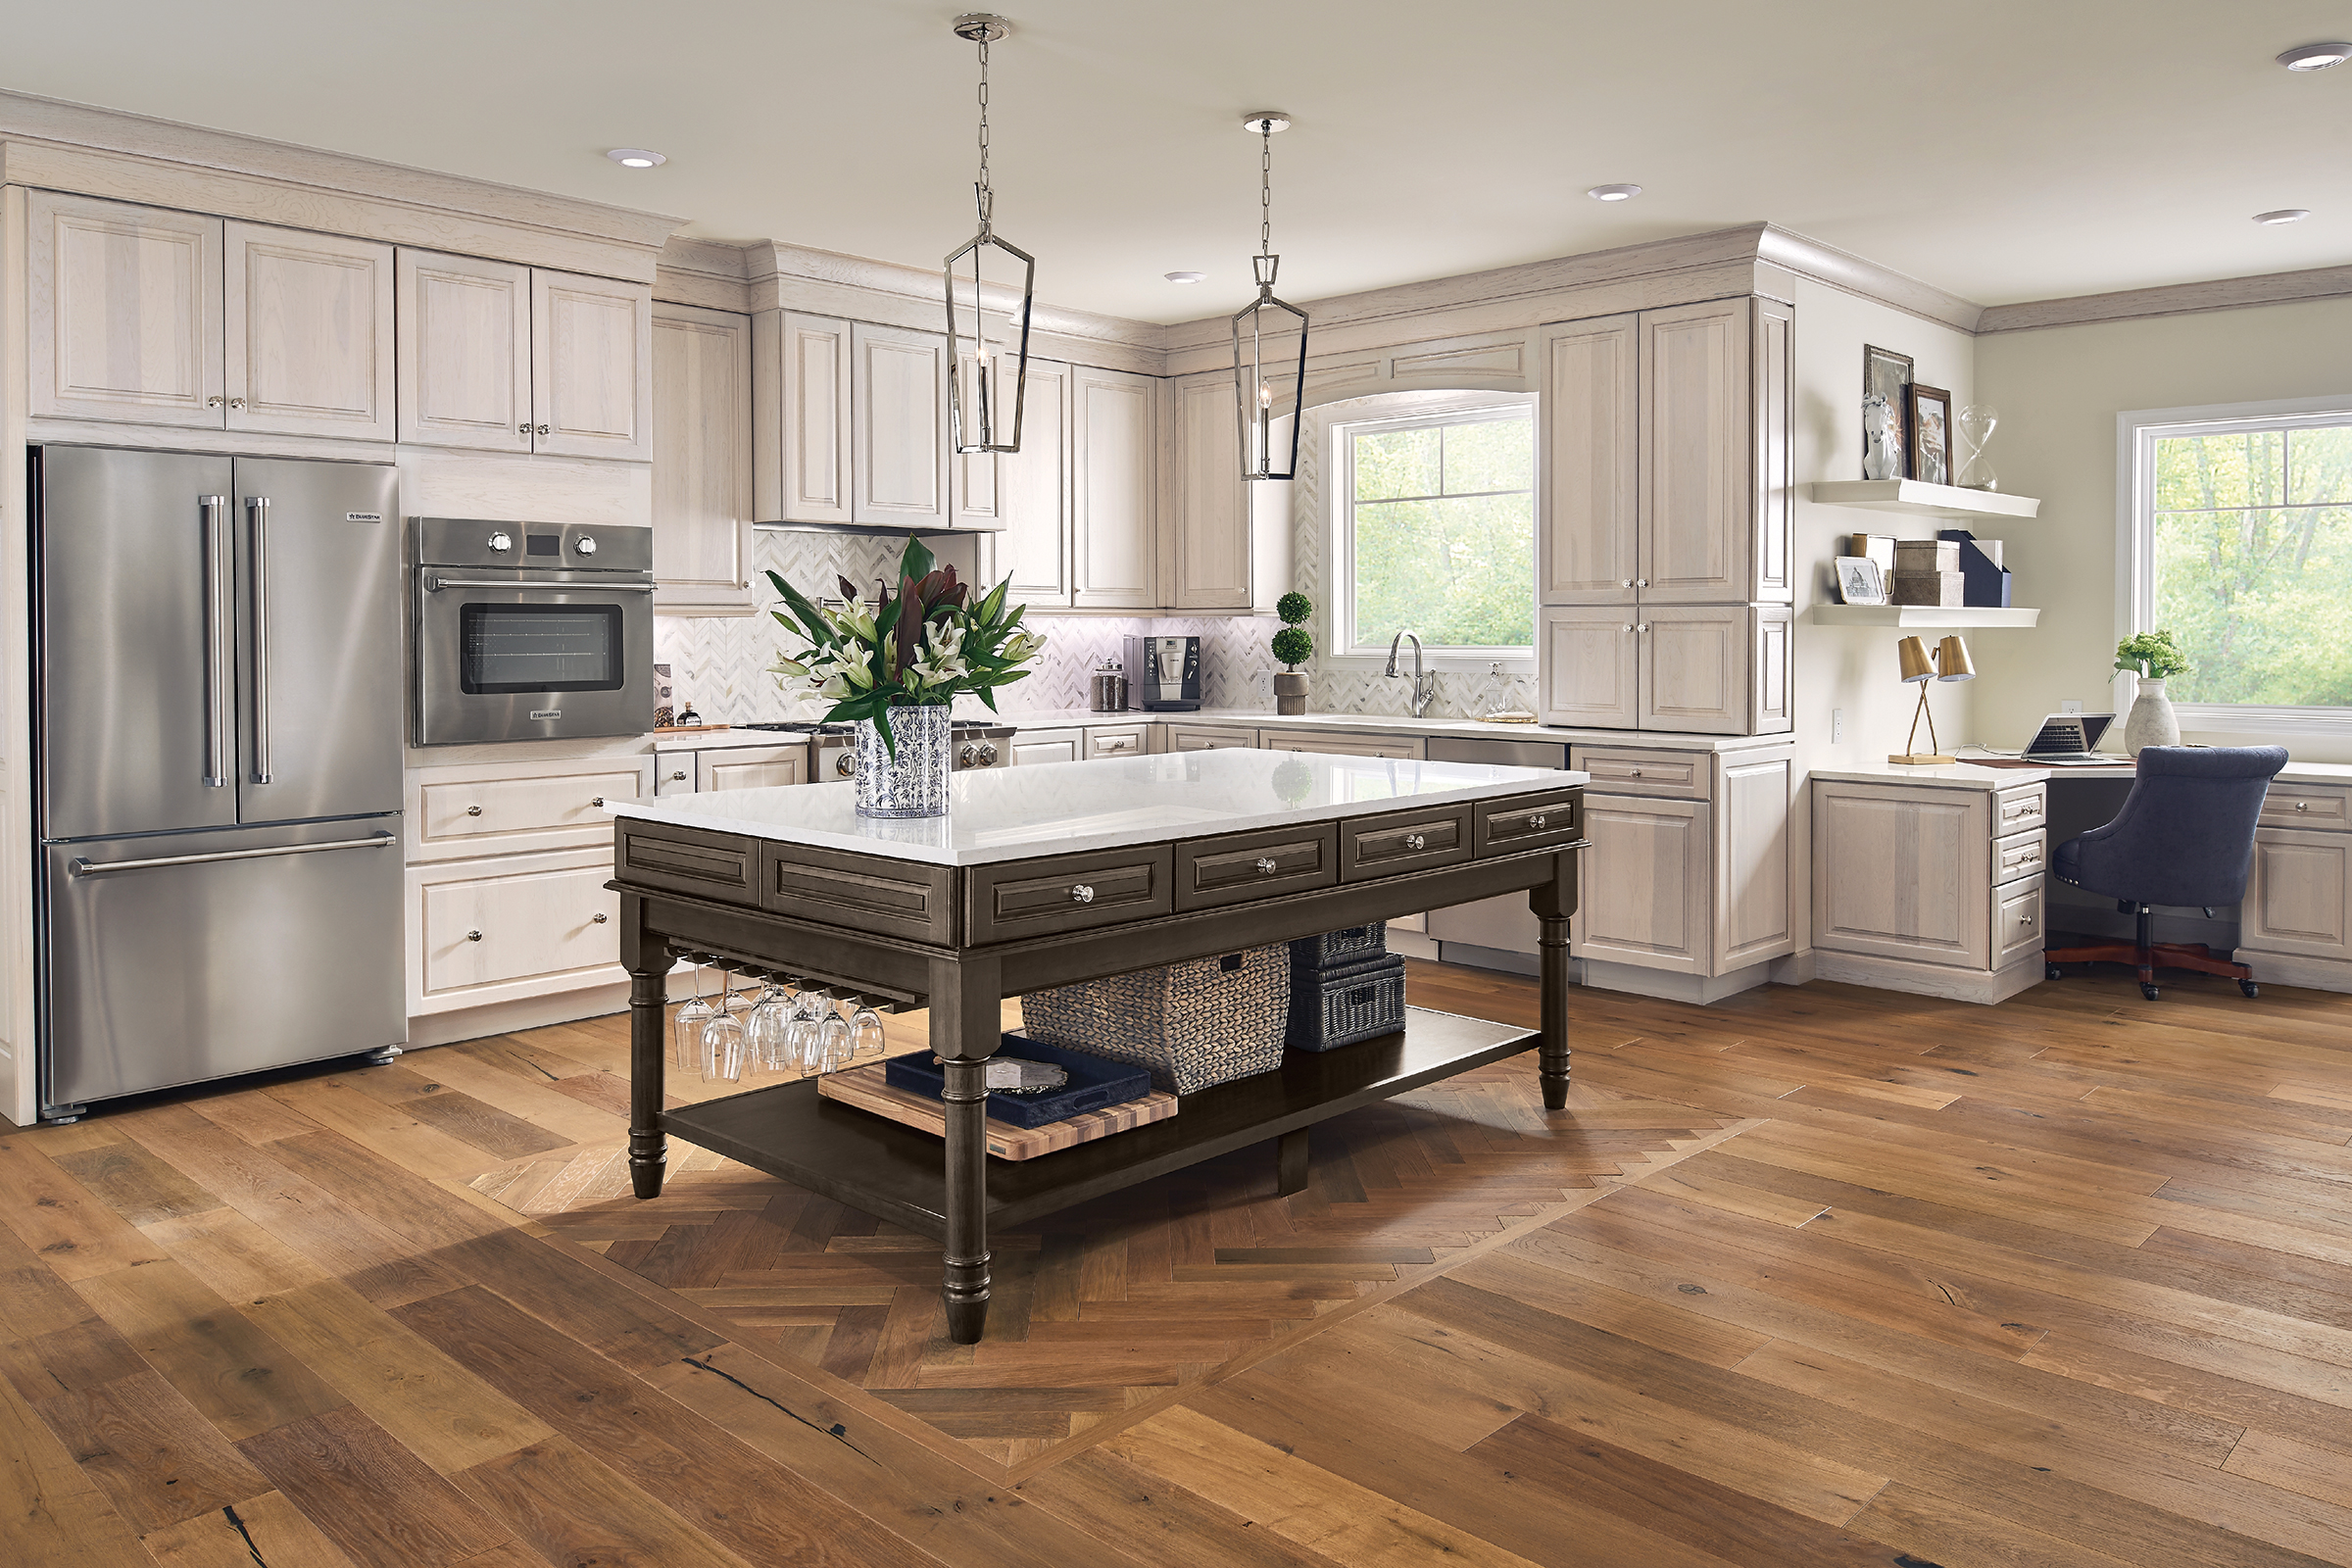 KraftMaid New Traditional Kitchen Designs With Islands